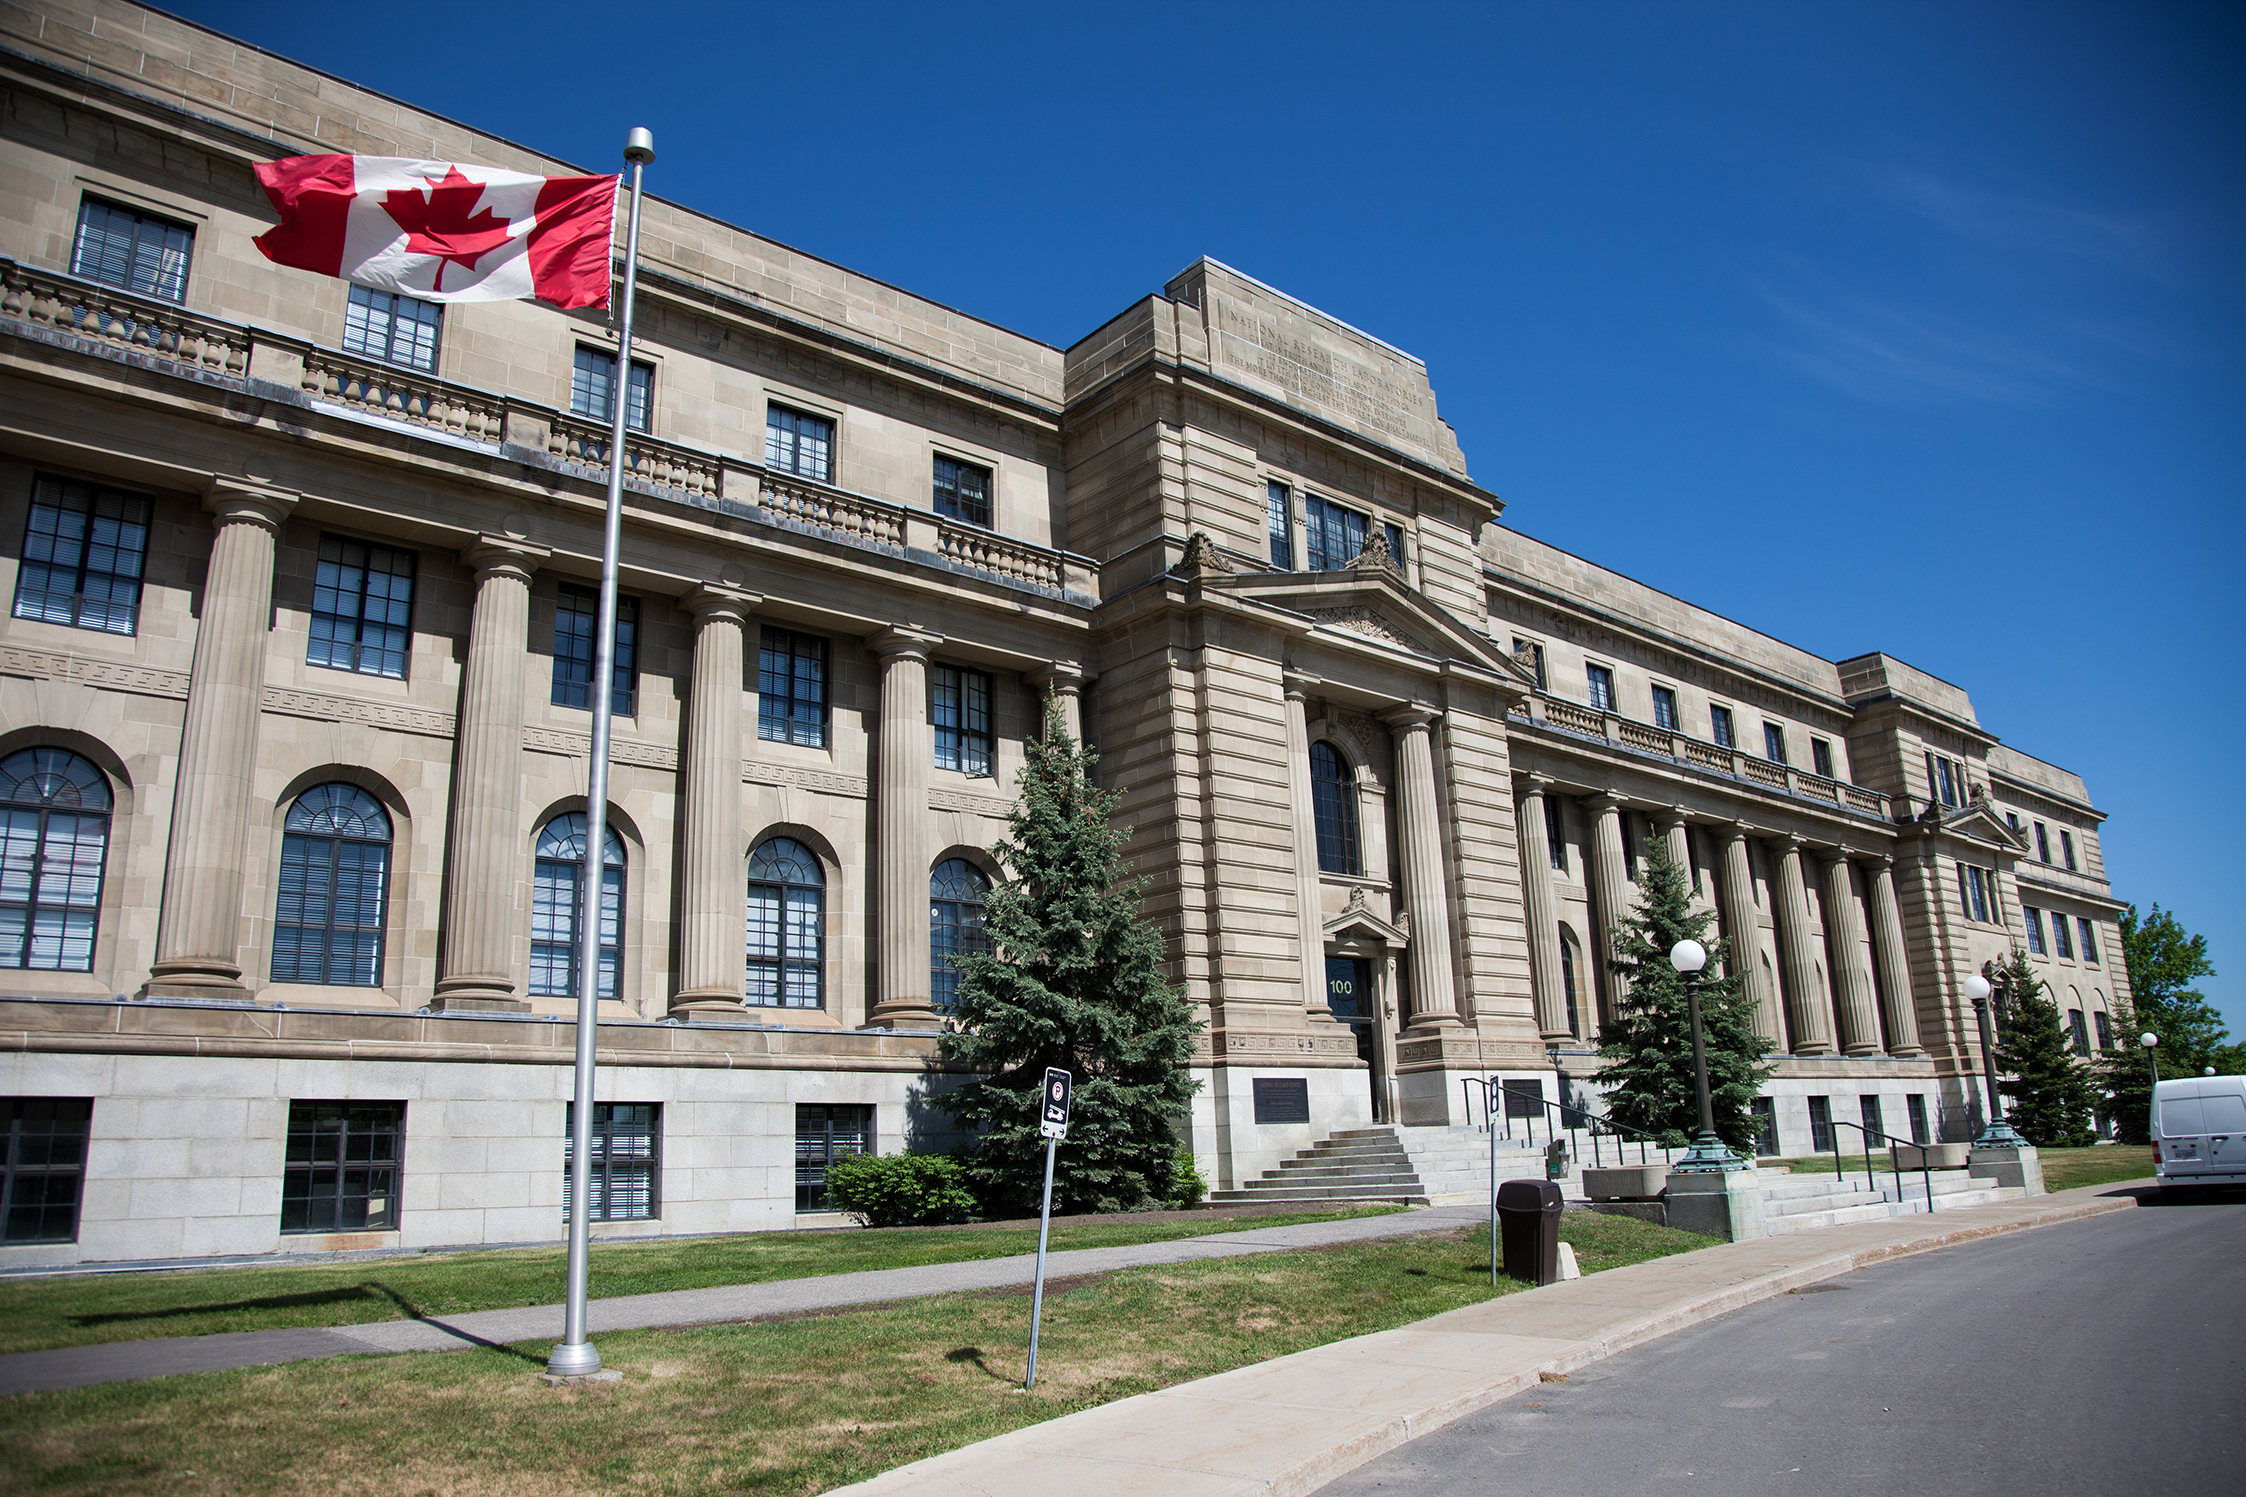 The National Research Council of Canada with a Canadian flag in the foreground.